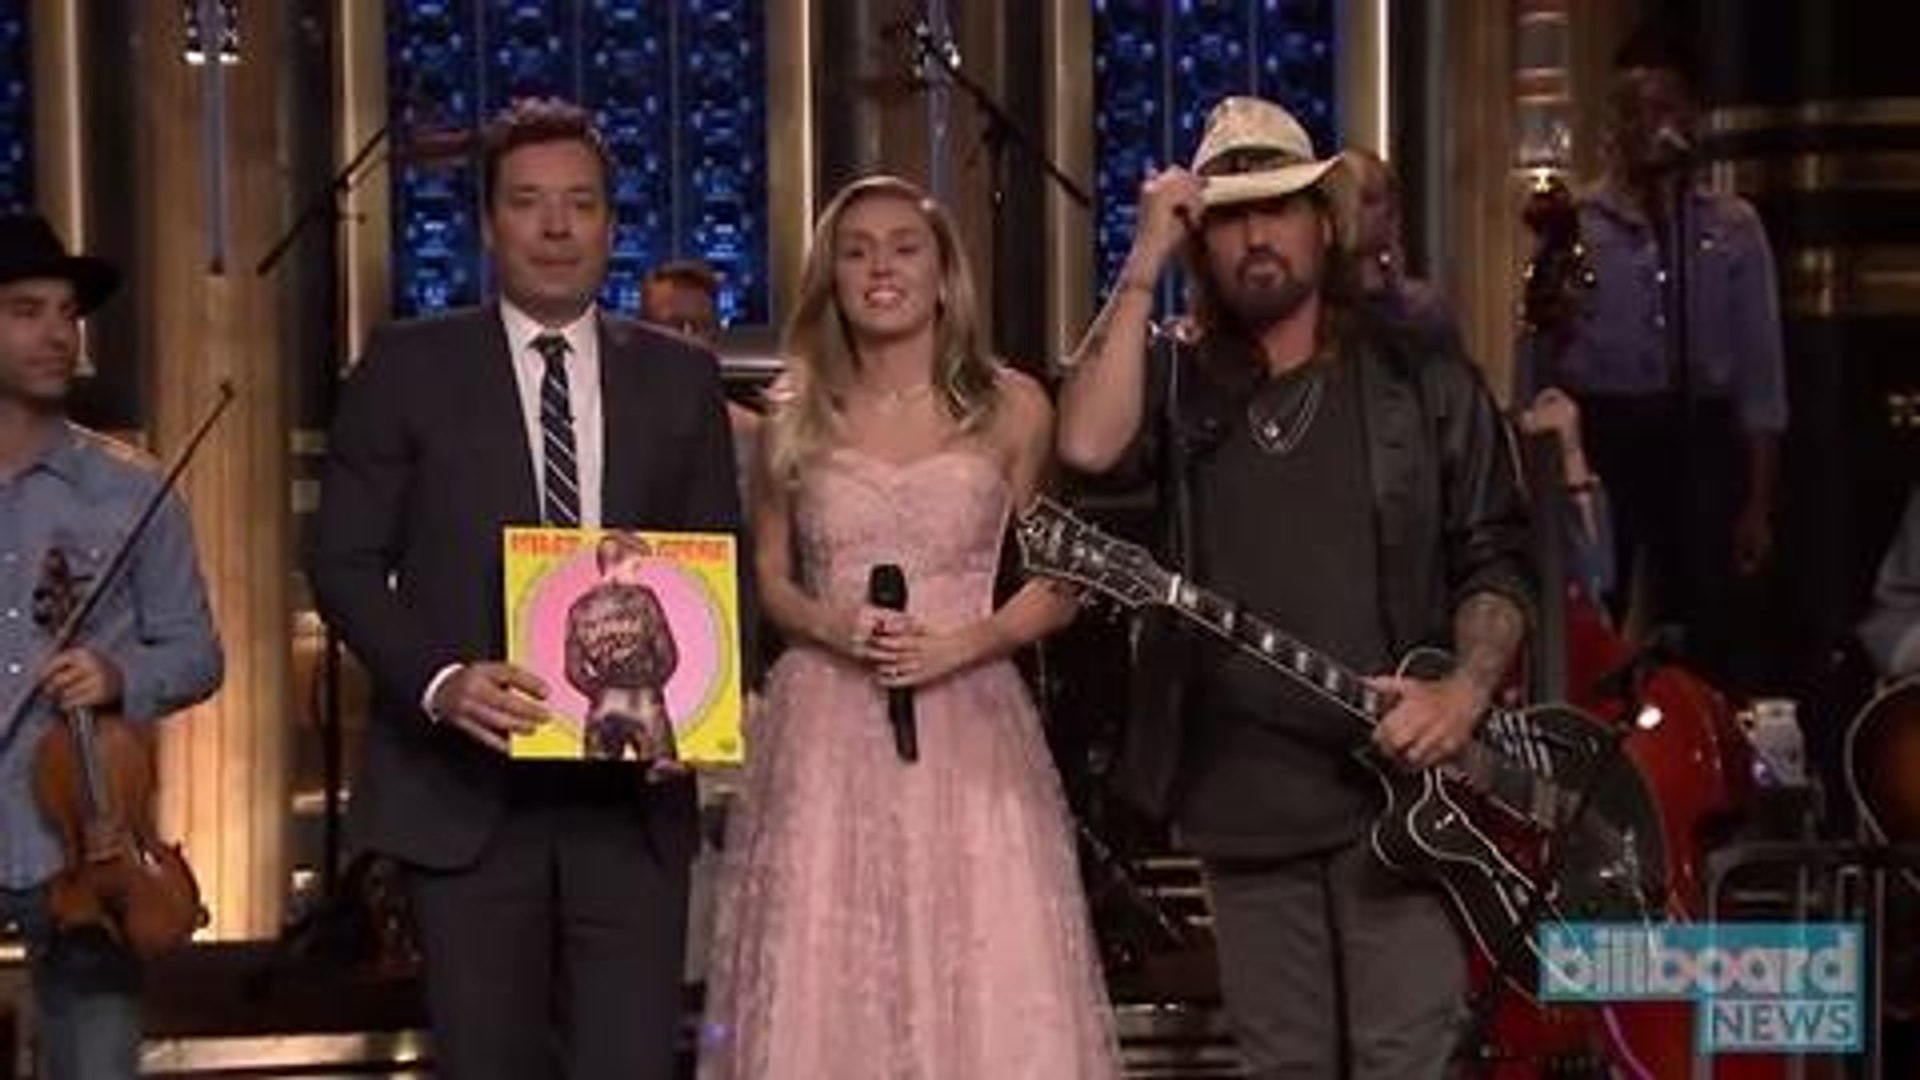 Miley Cyrus & Billy Ray Cyrus Pay Homage to Tom Pettty on 'Tonight Show' | Billboard N